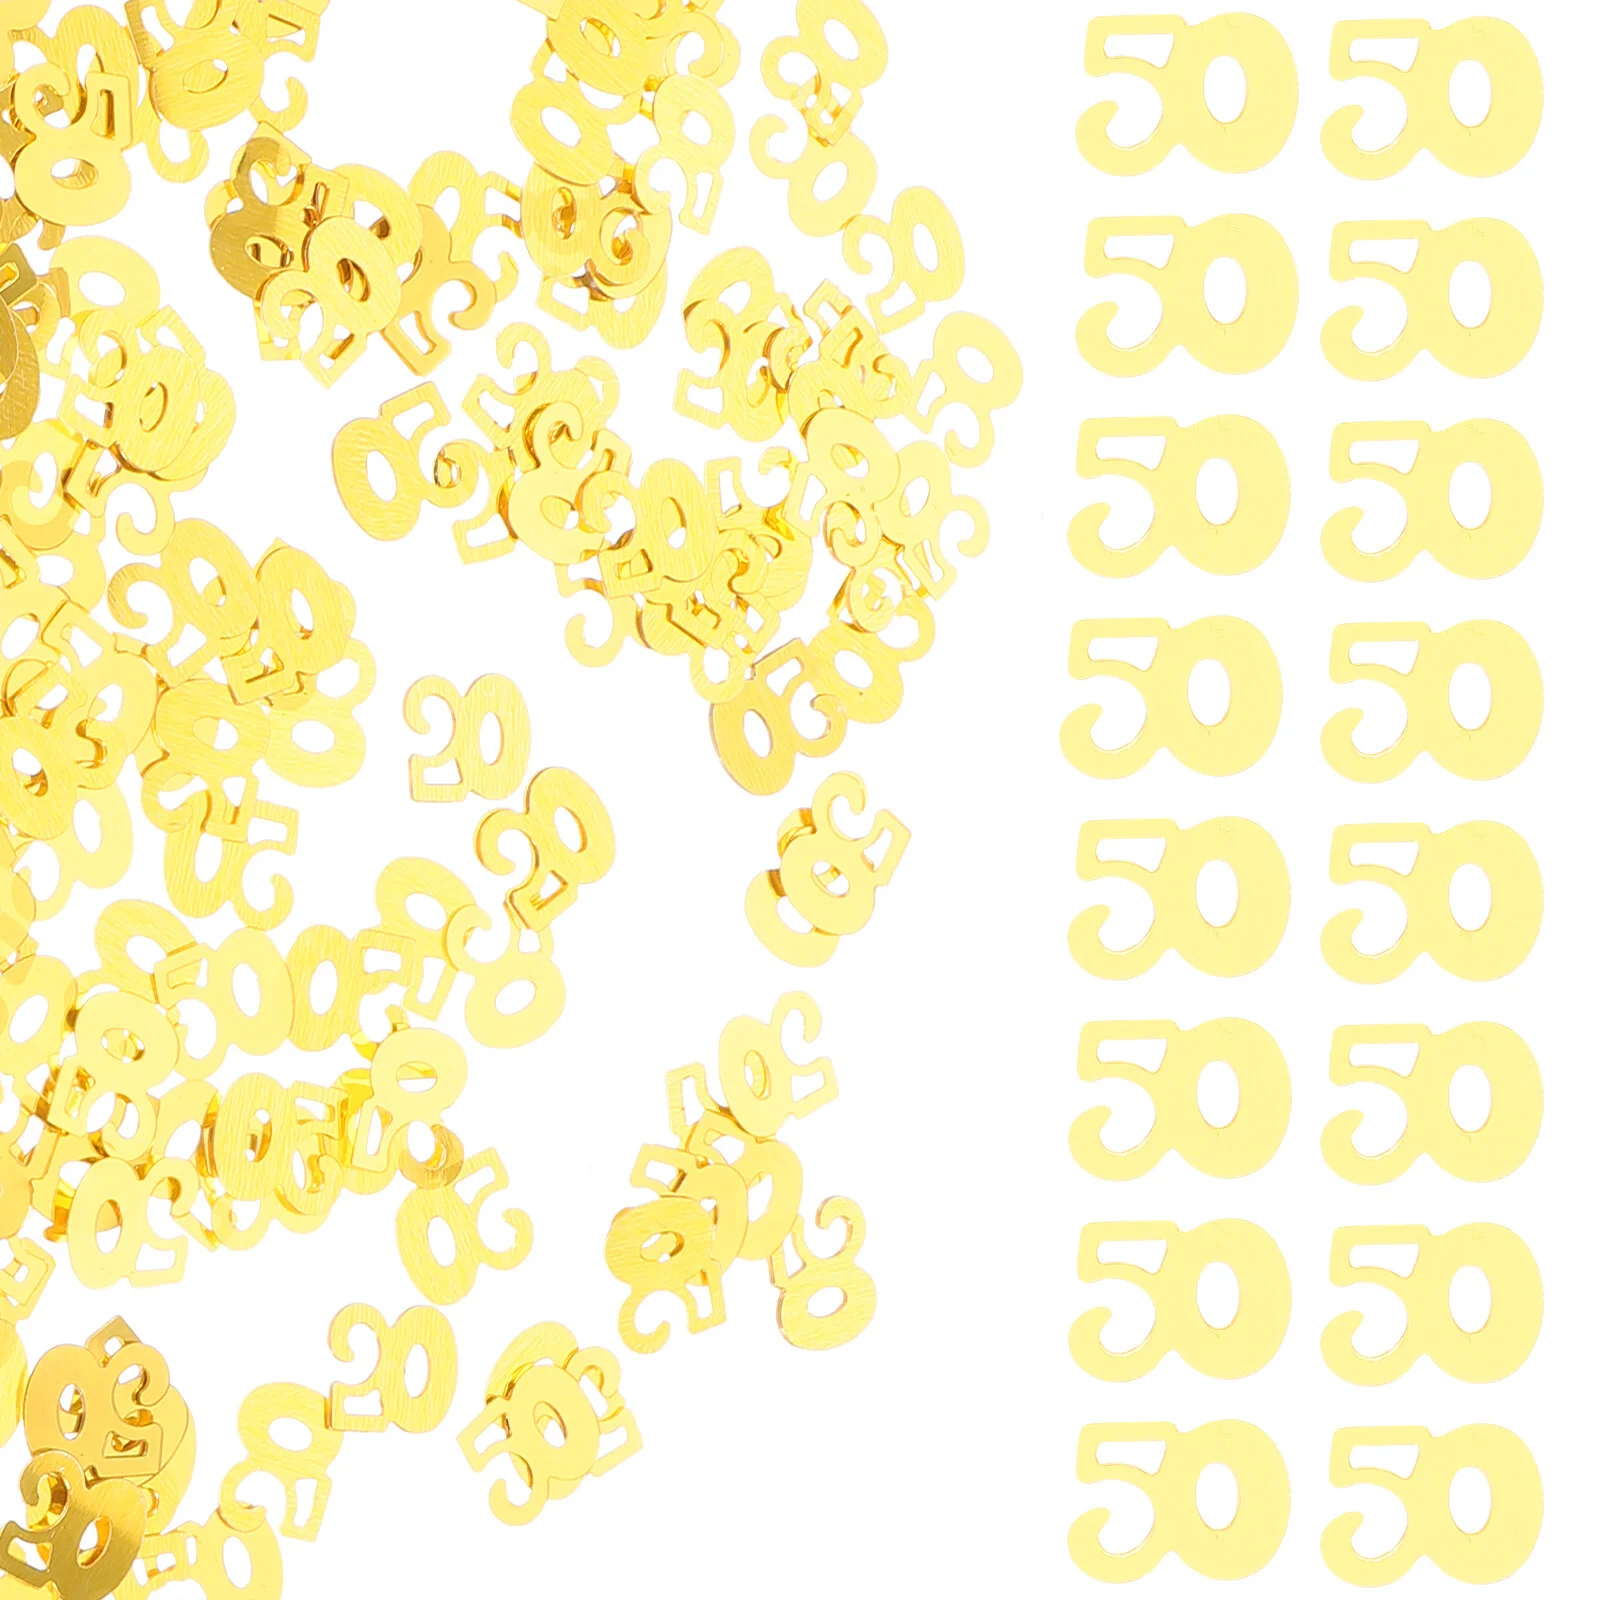 

1200pcs 50 Sequins 50th Birthday Party Table Decoration 50 for Birthday Anniversary ( Golden )